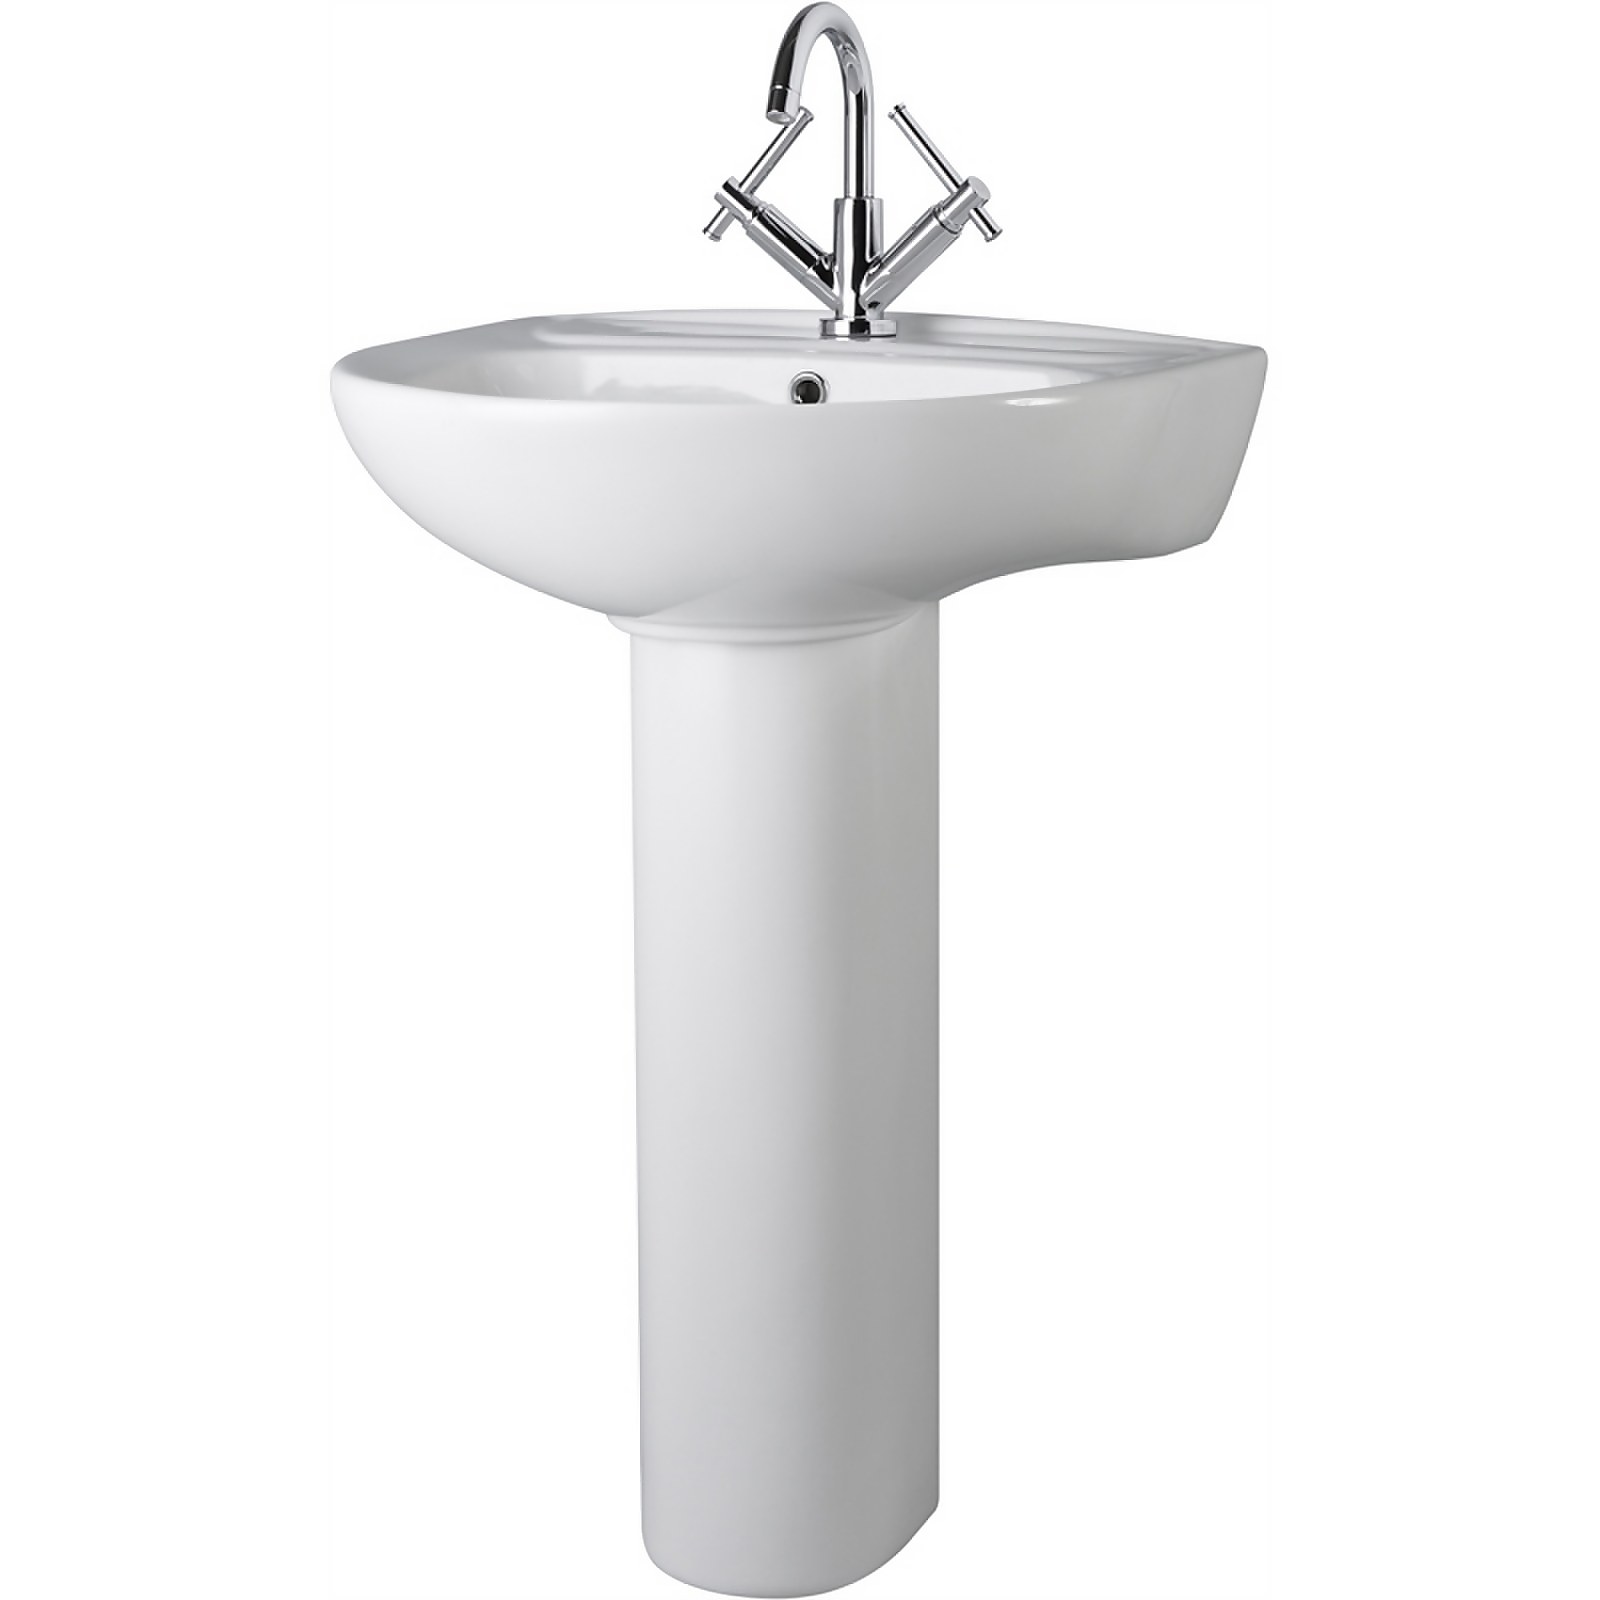 Photo of Balterley Adley 1 Tap Hole Basin And Full Pedestal - 550mm